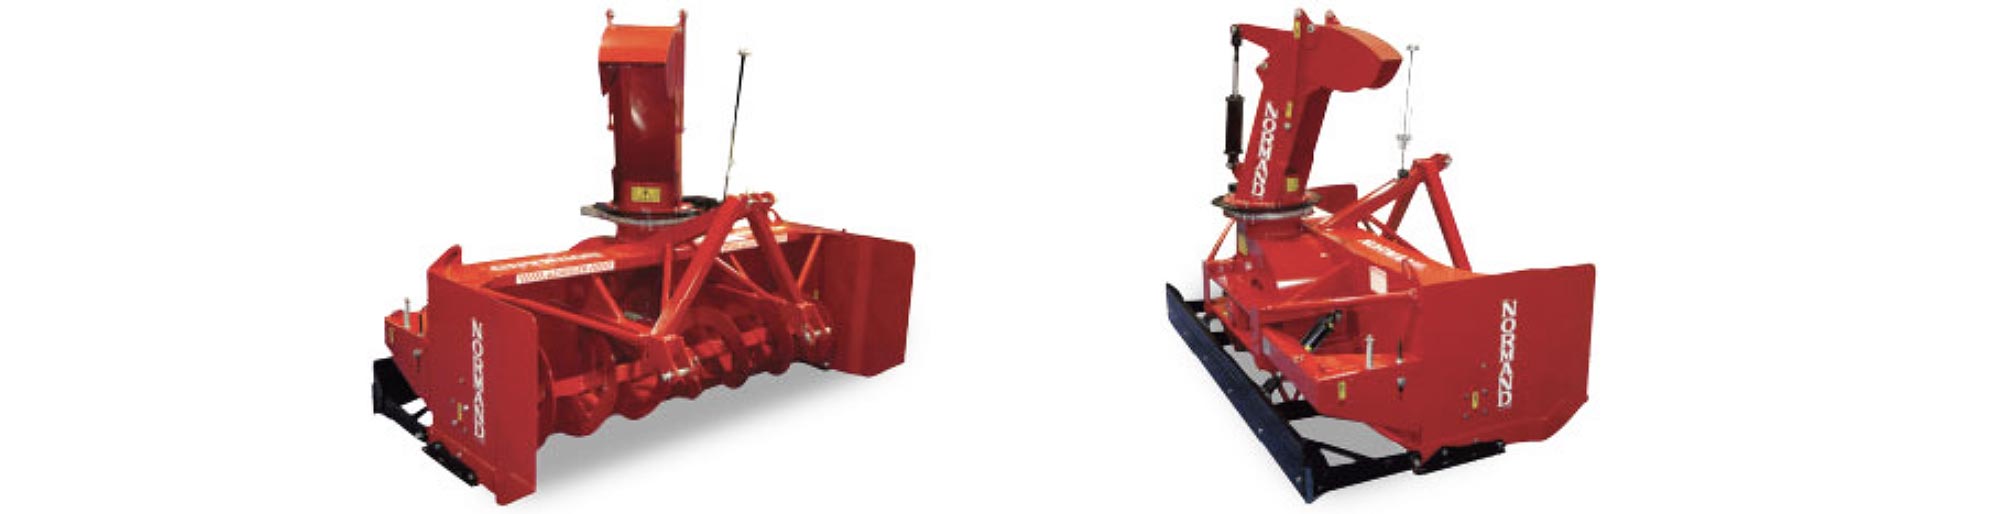 NORMAND Pull Type Snow Blowers